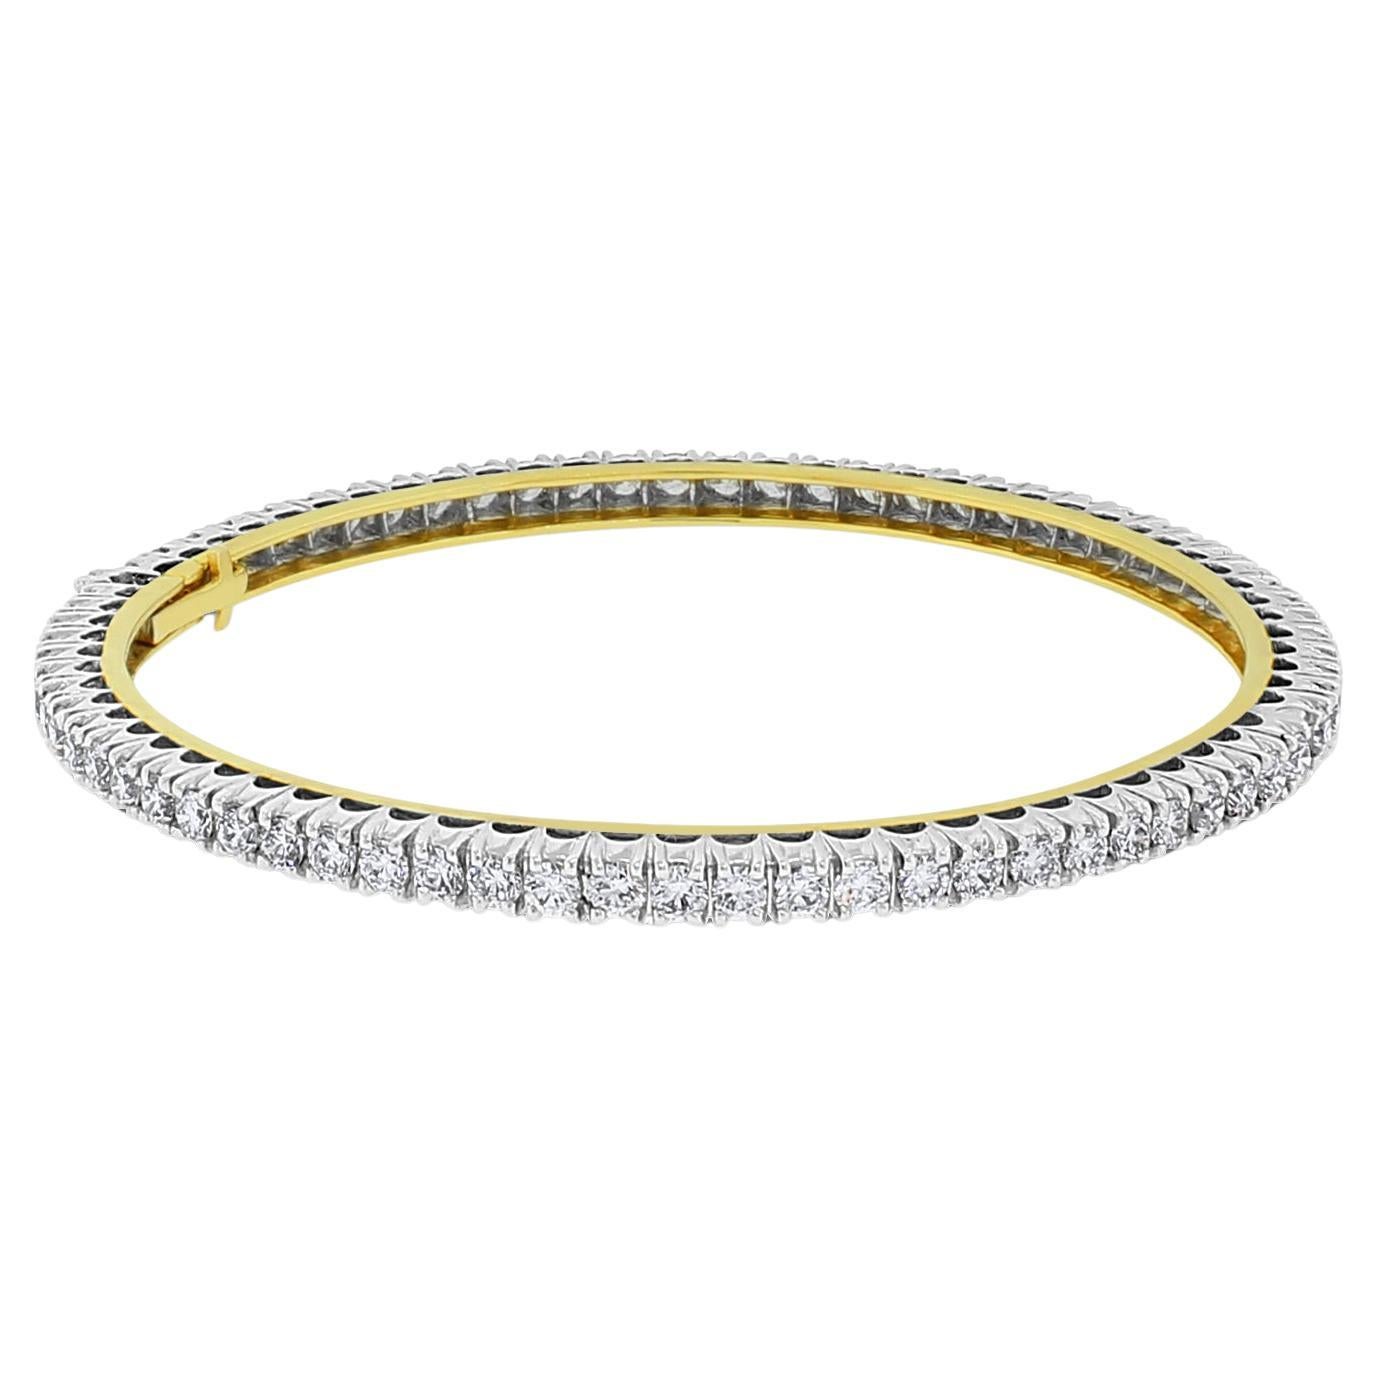 Beauvince Forever Indian Diamond Bangle '5.03 Ct Diamonds' in Gold